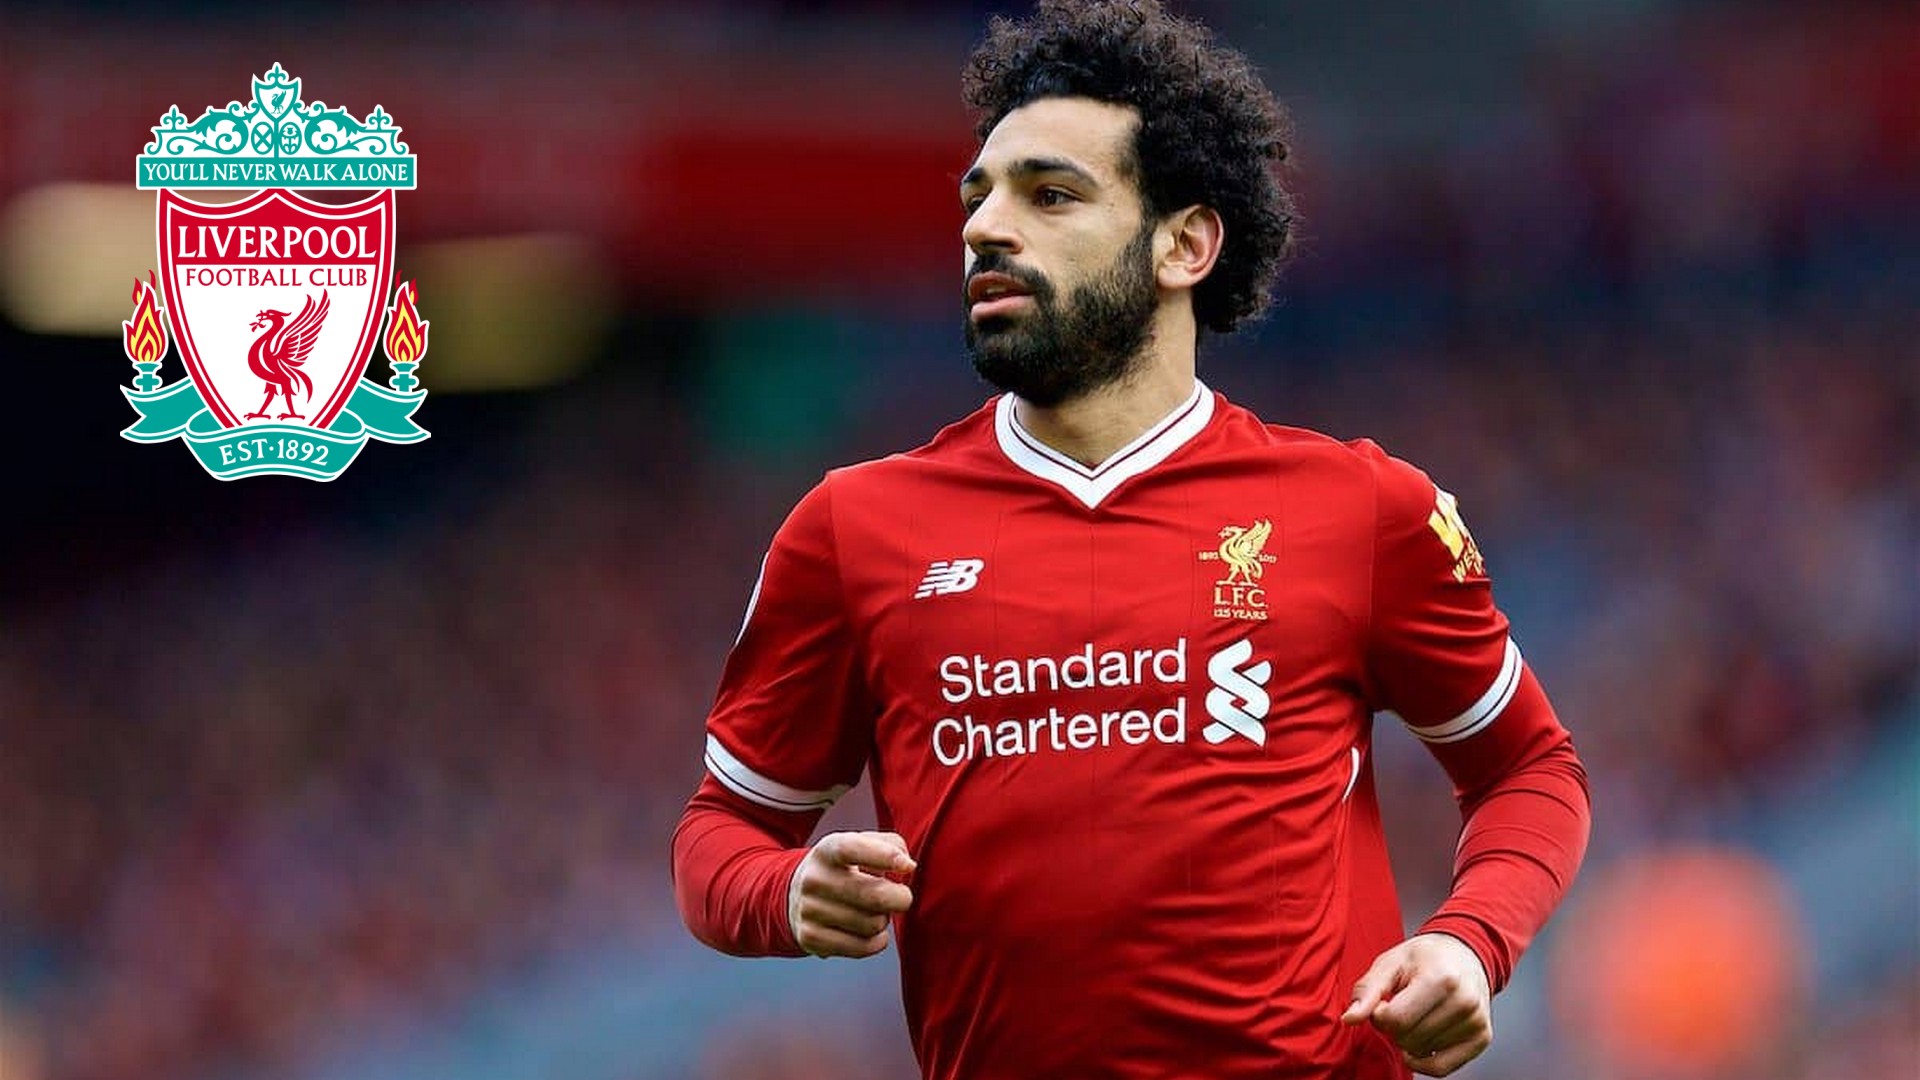 Best Mohamed Salah Wallpaper with resolution 1920X1080 pixel. You can use this wallpaper as background for your desktop Computer Screensavers, Android or iPhone smartphones